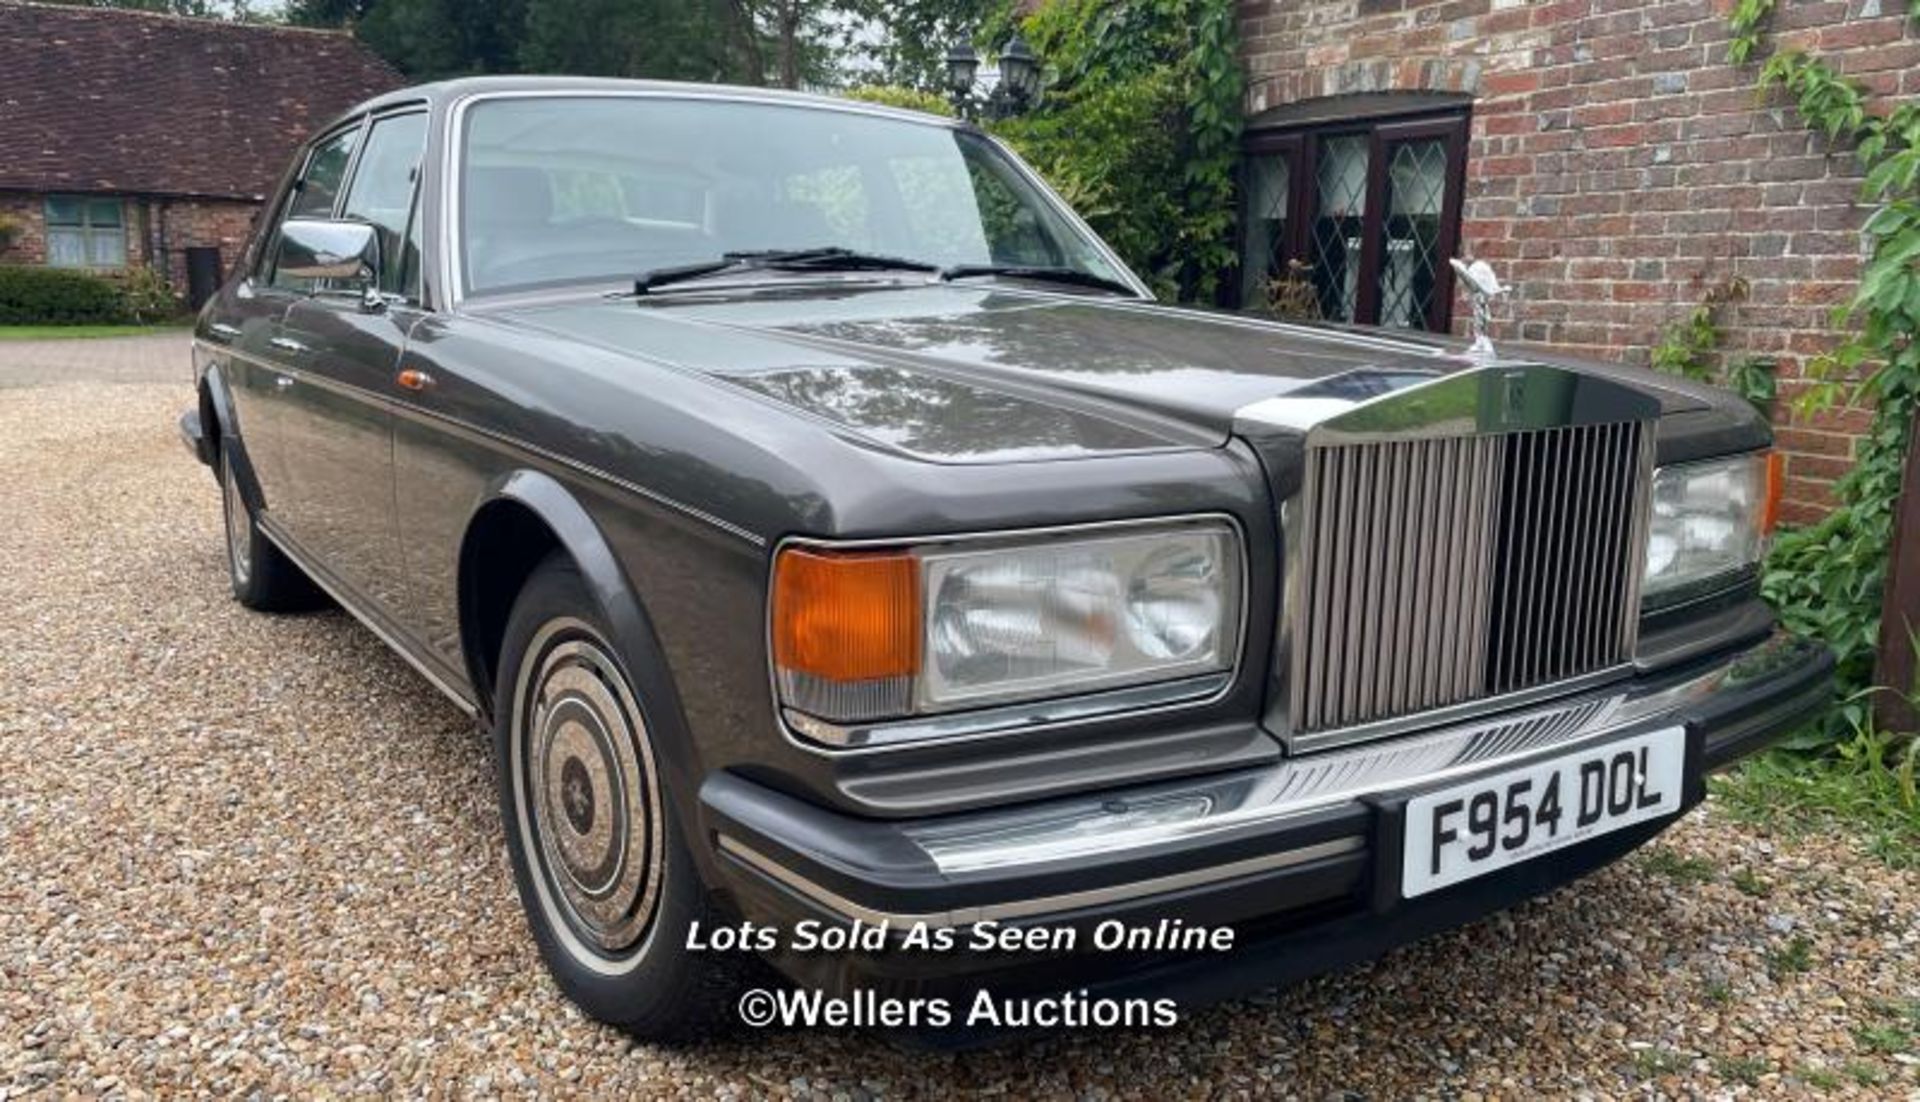 ROLLS ROYCE SILVER SPIRIT II, 1988 - THE ROLLS ROYCE SILVER SPIRIT II HAS HAD A NEW BATTERY AND FOUR